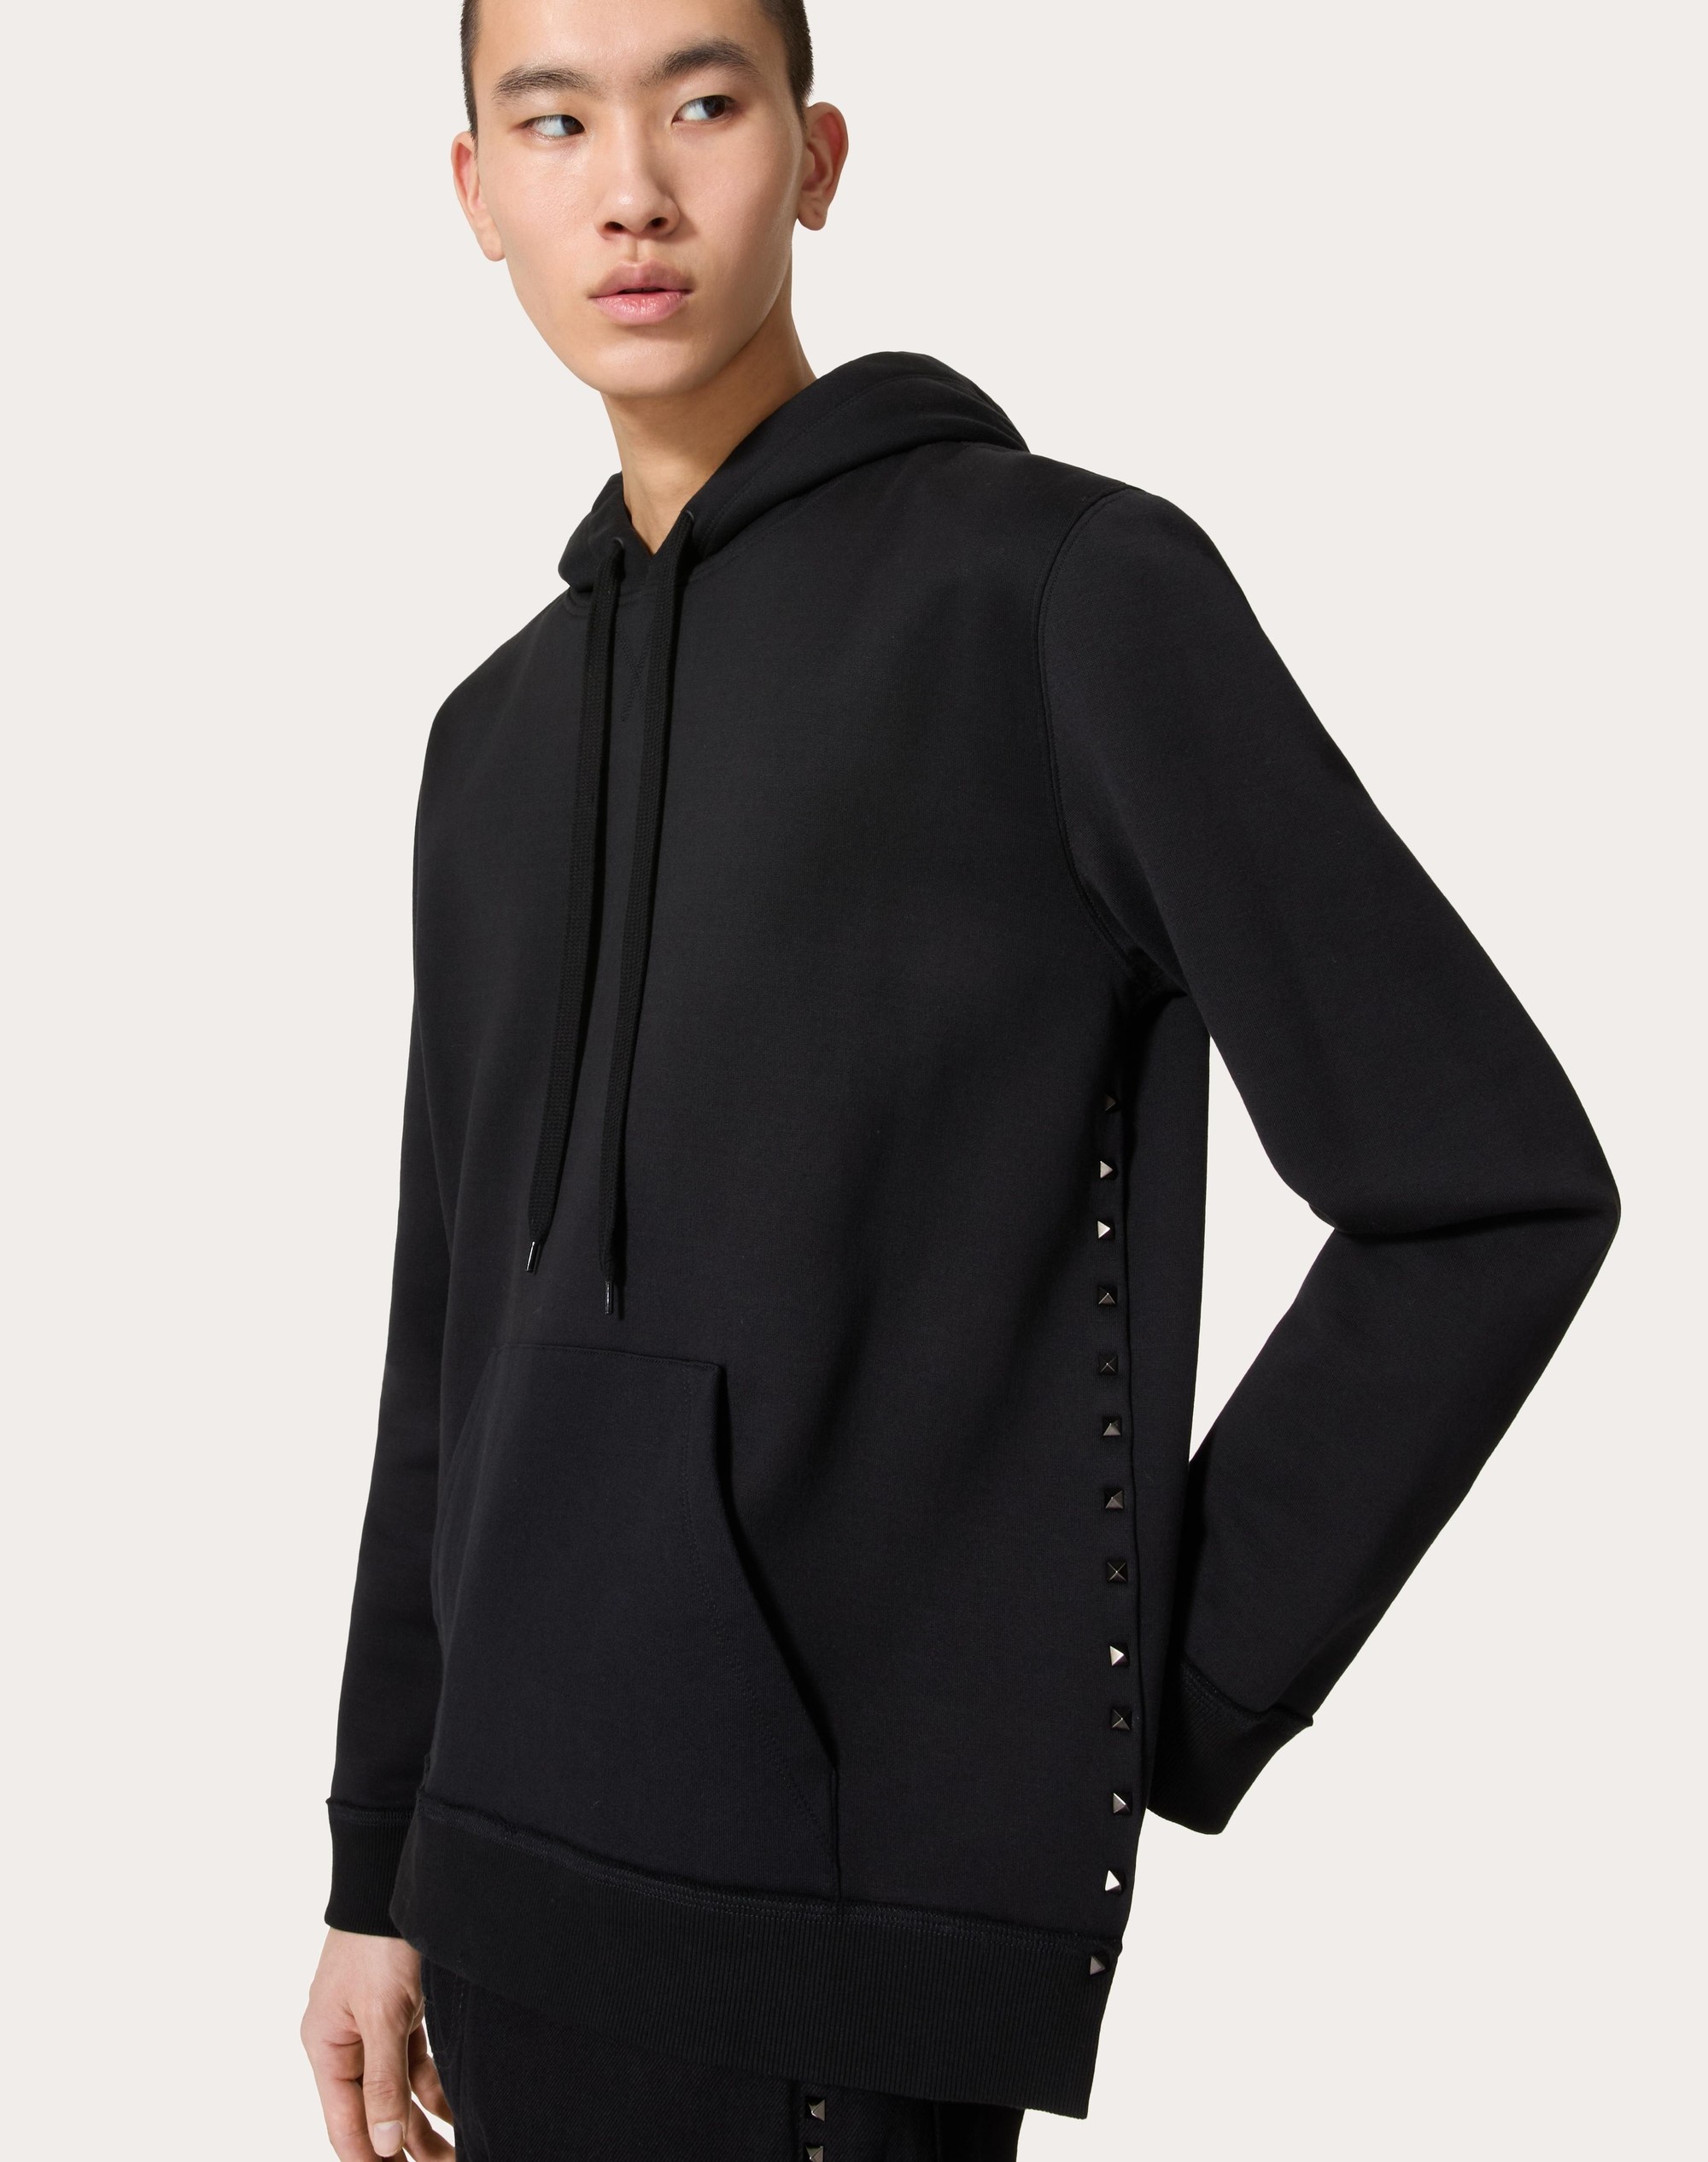 COTTON HOODED SWEATSHIRT WITH BLACK UNTITLED STUDS - 5